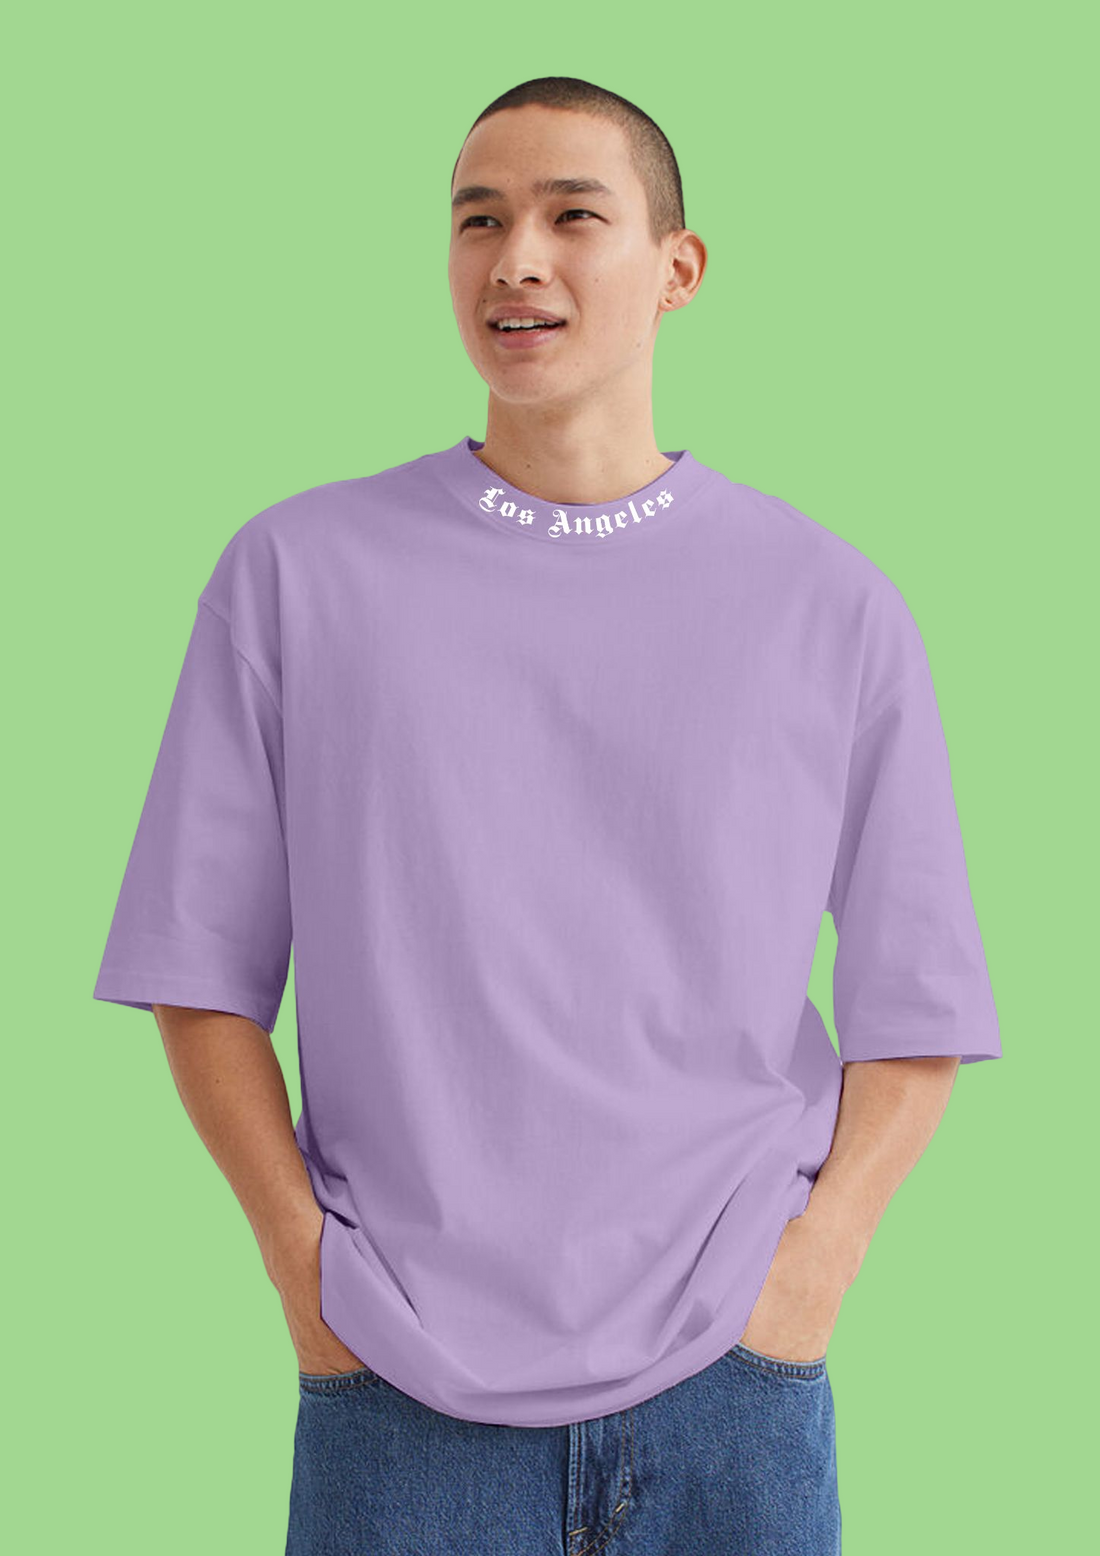 Los Angeles Lavender Drop-Shoulder Oversized Tee: Experience Comfort and Style with Bwolves